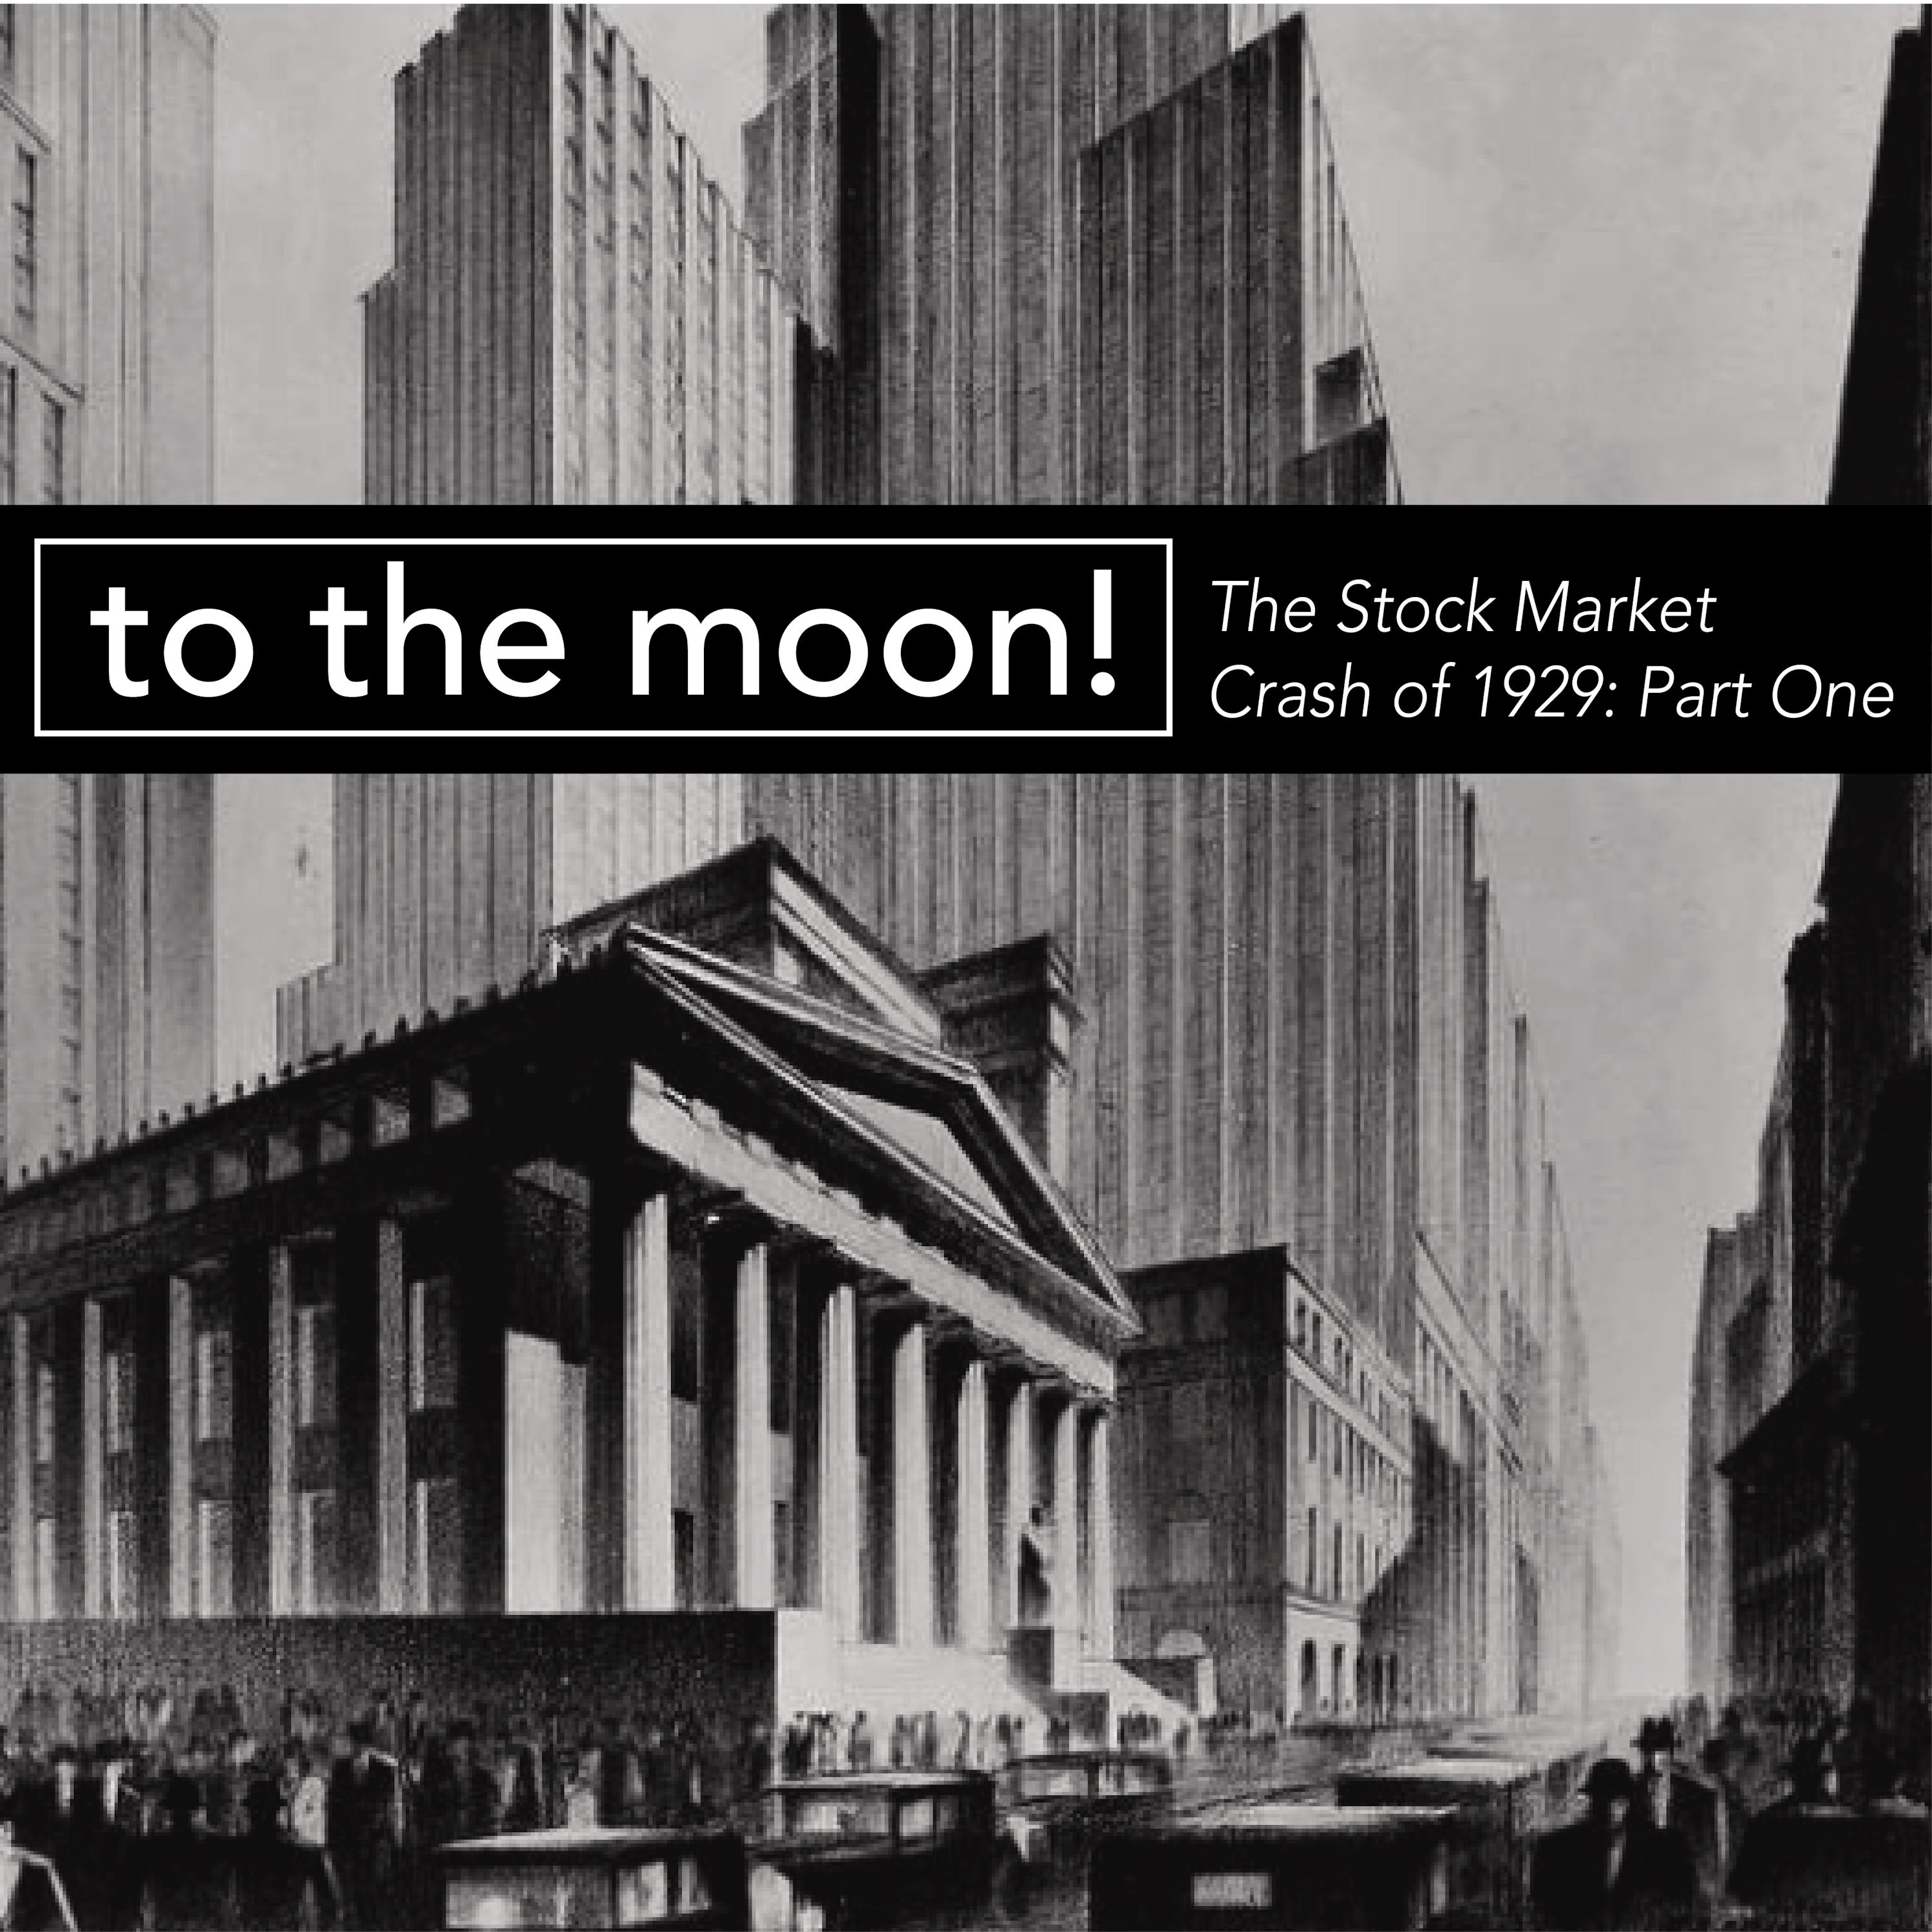 The Stock Market Crash of 1929 – Part 1: To The Moon! Image